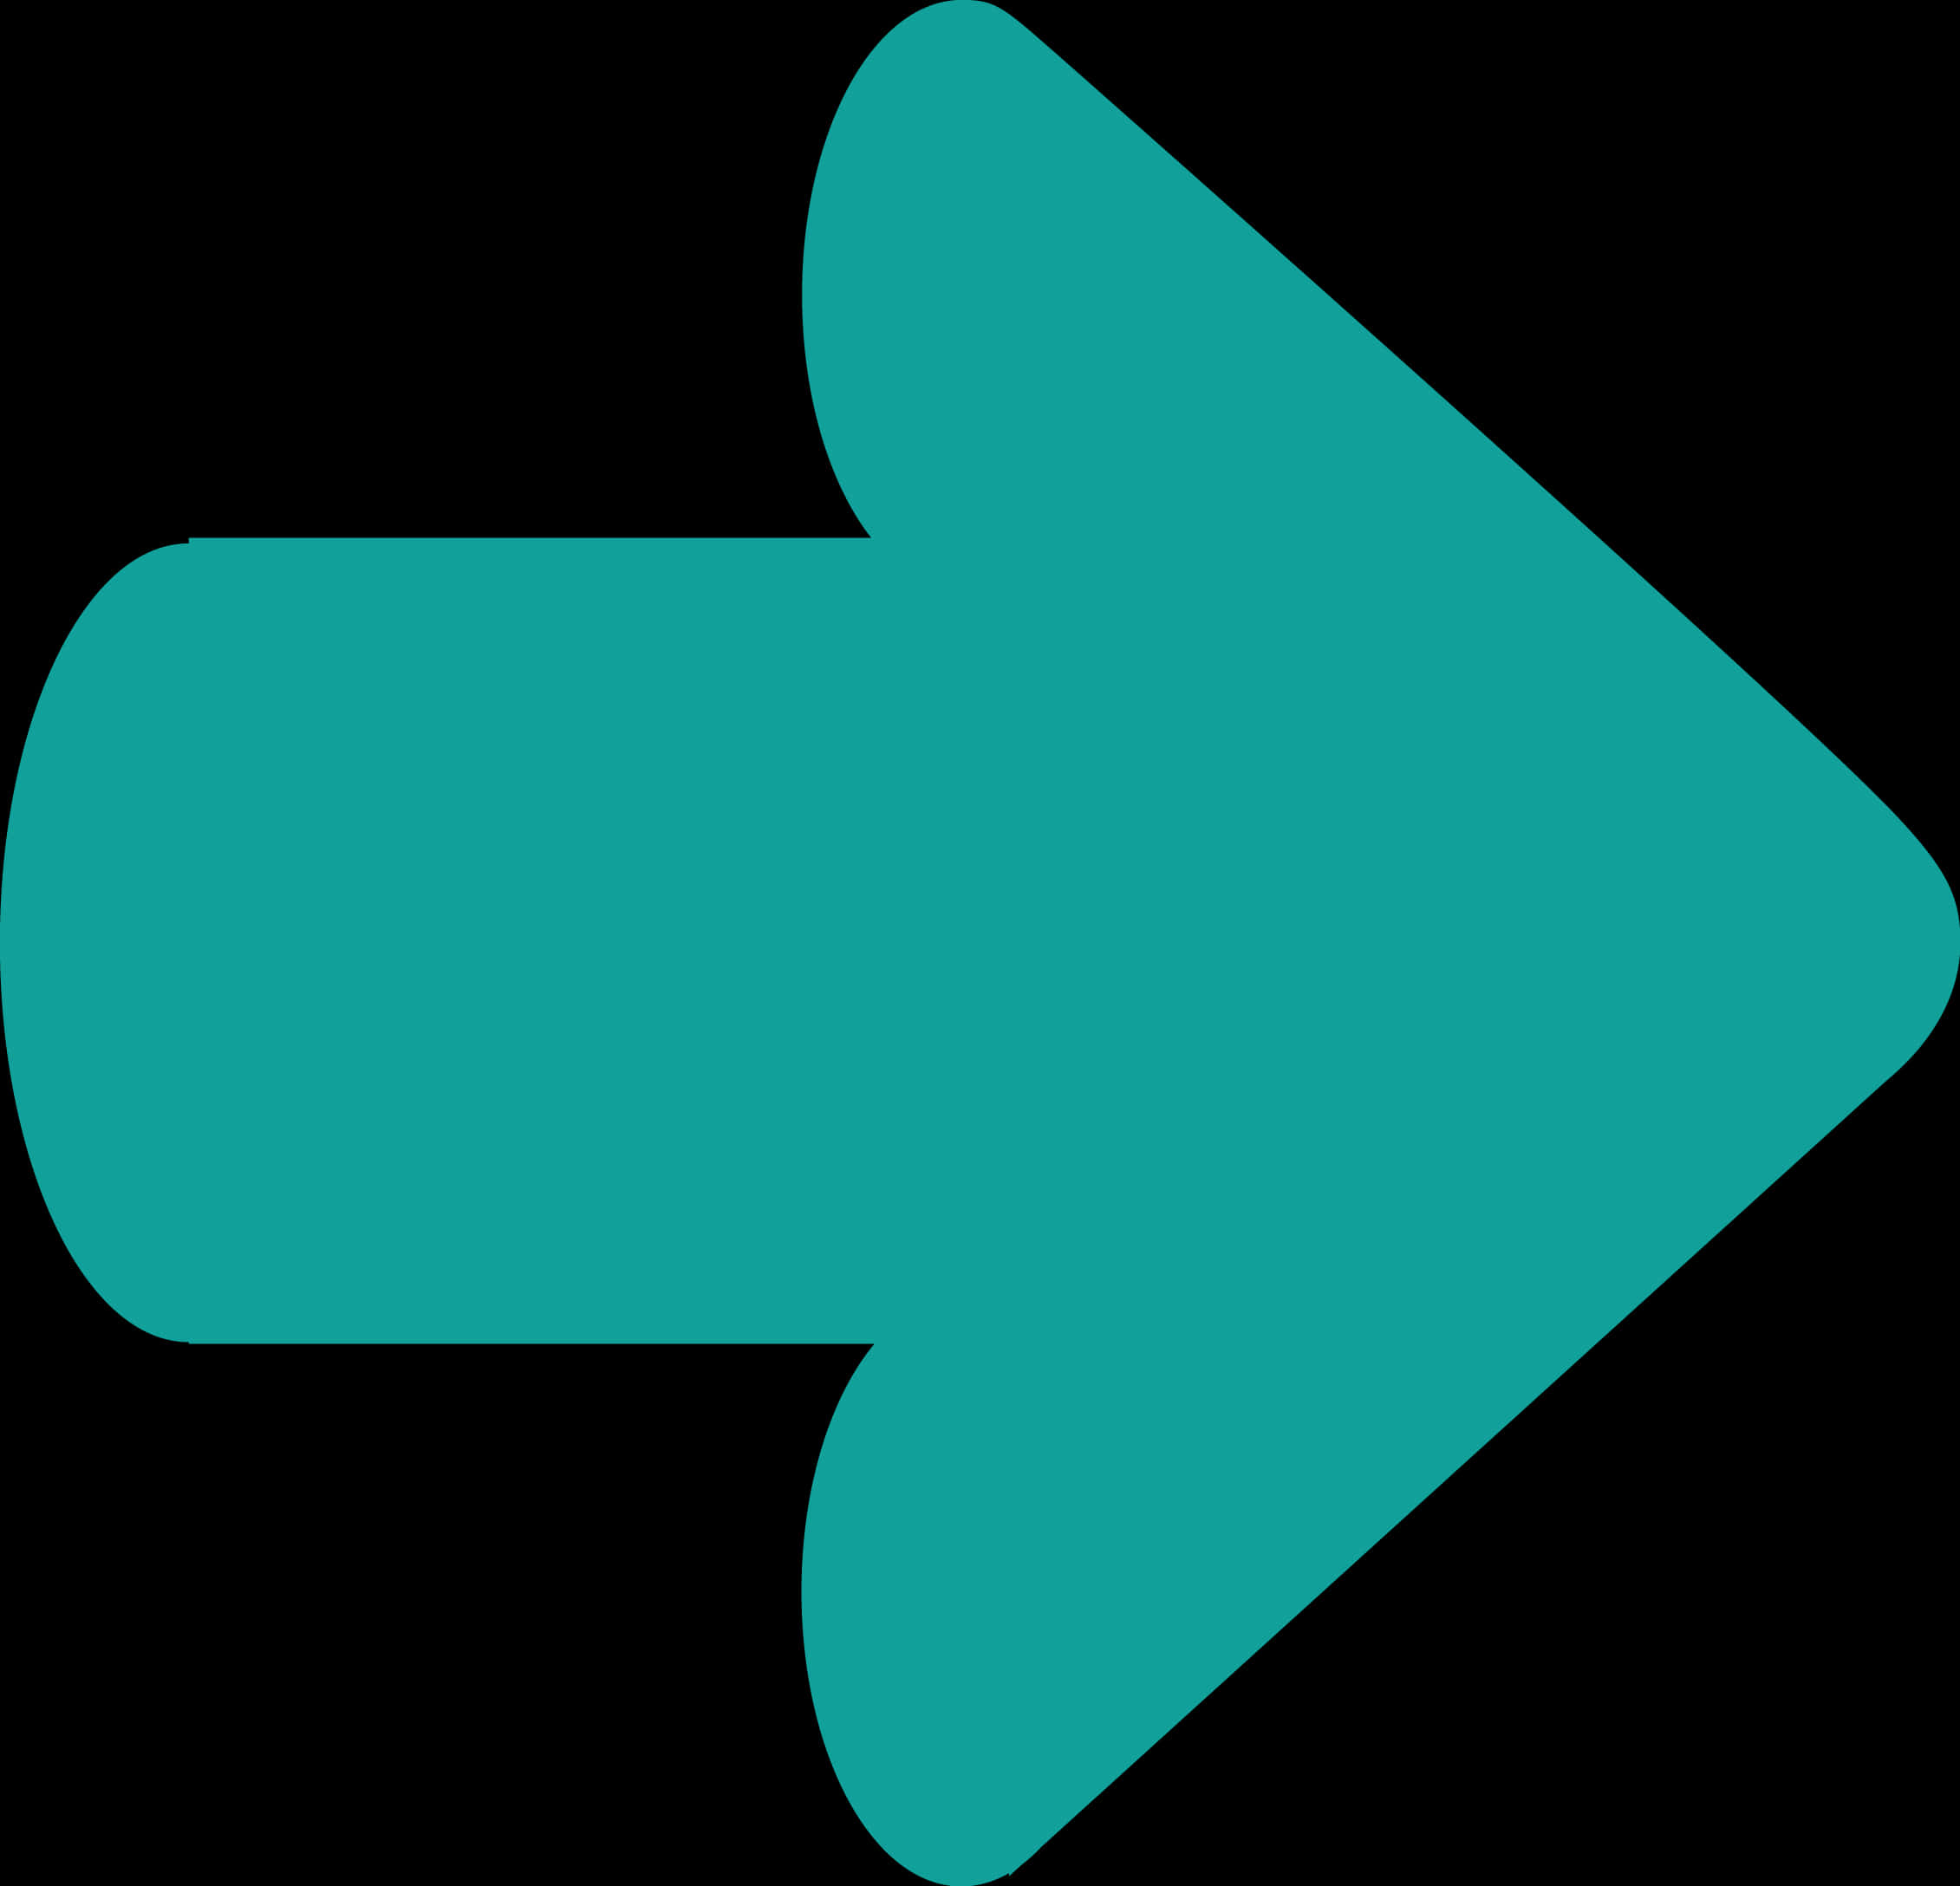 Teal Arrow Graphic PNG